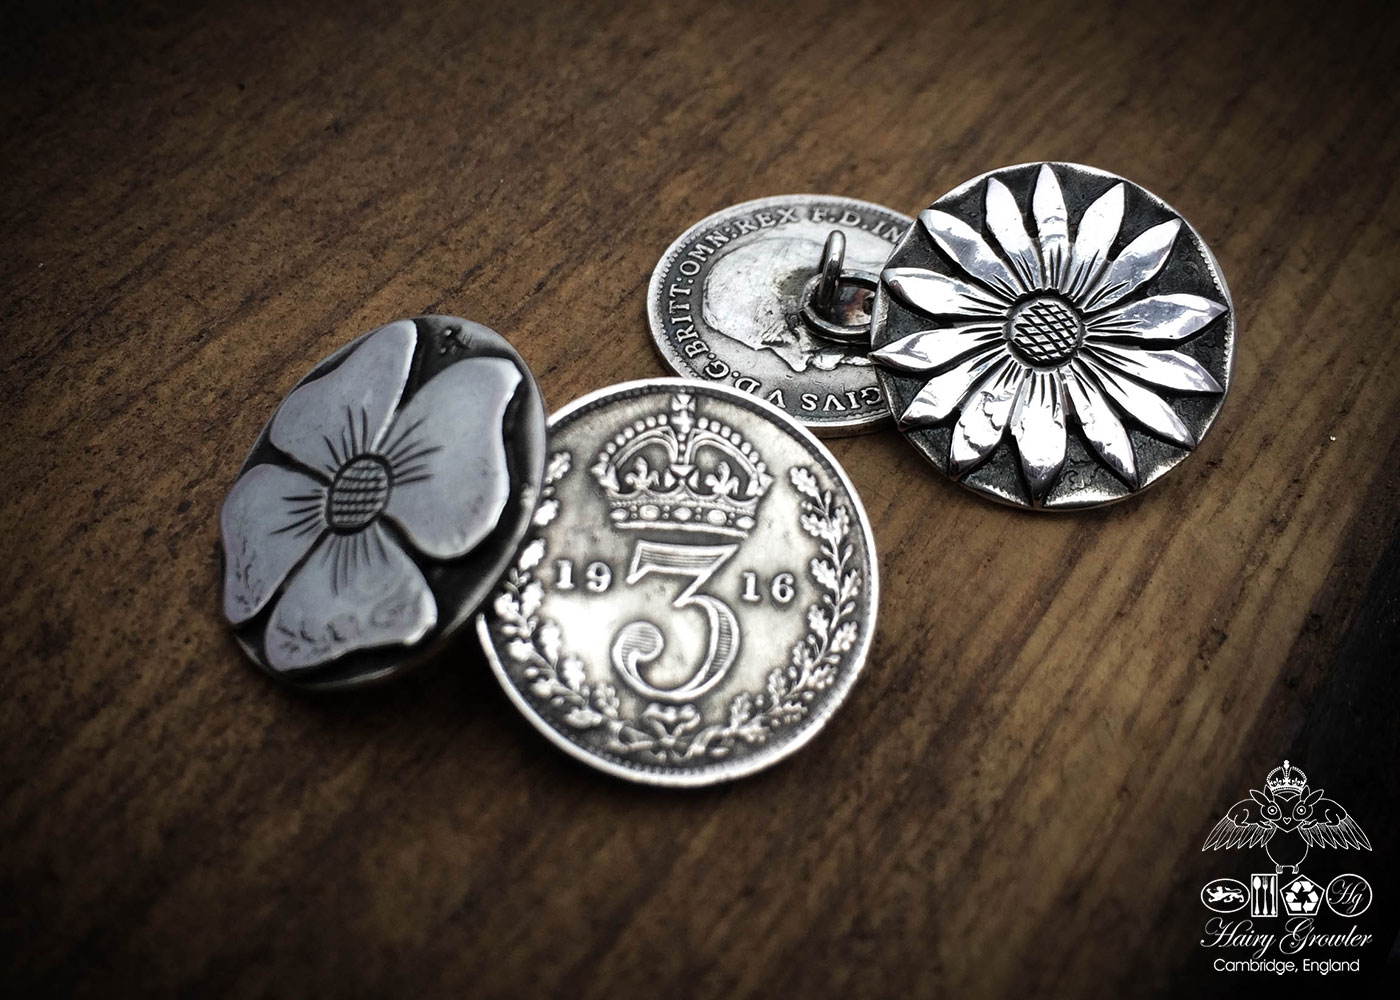 Handcrafted and recycled lucky threepence coin flower cufflinks